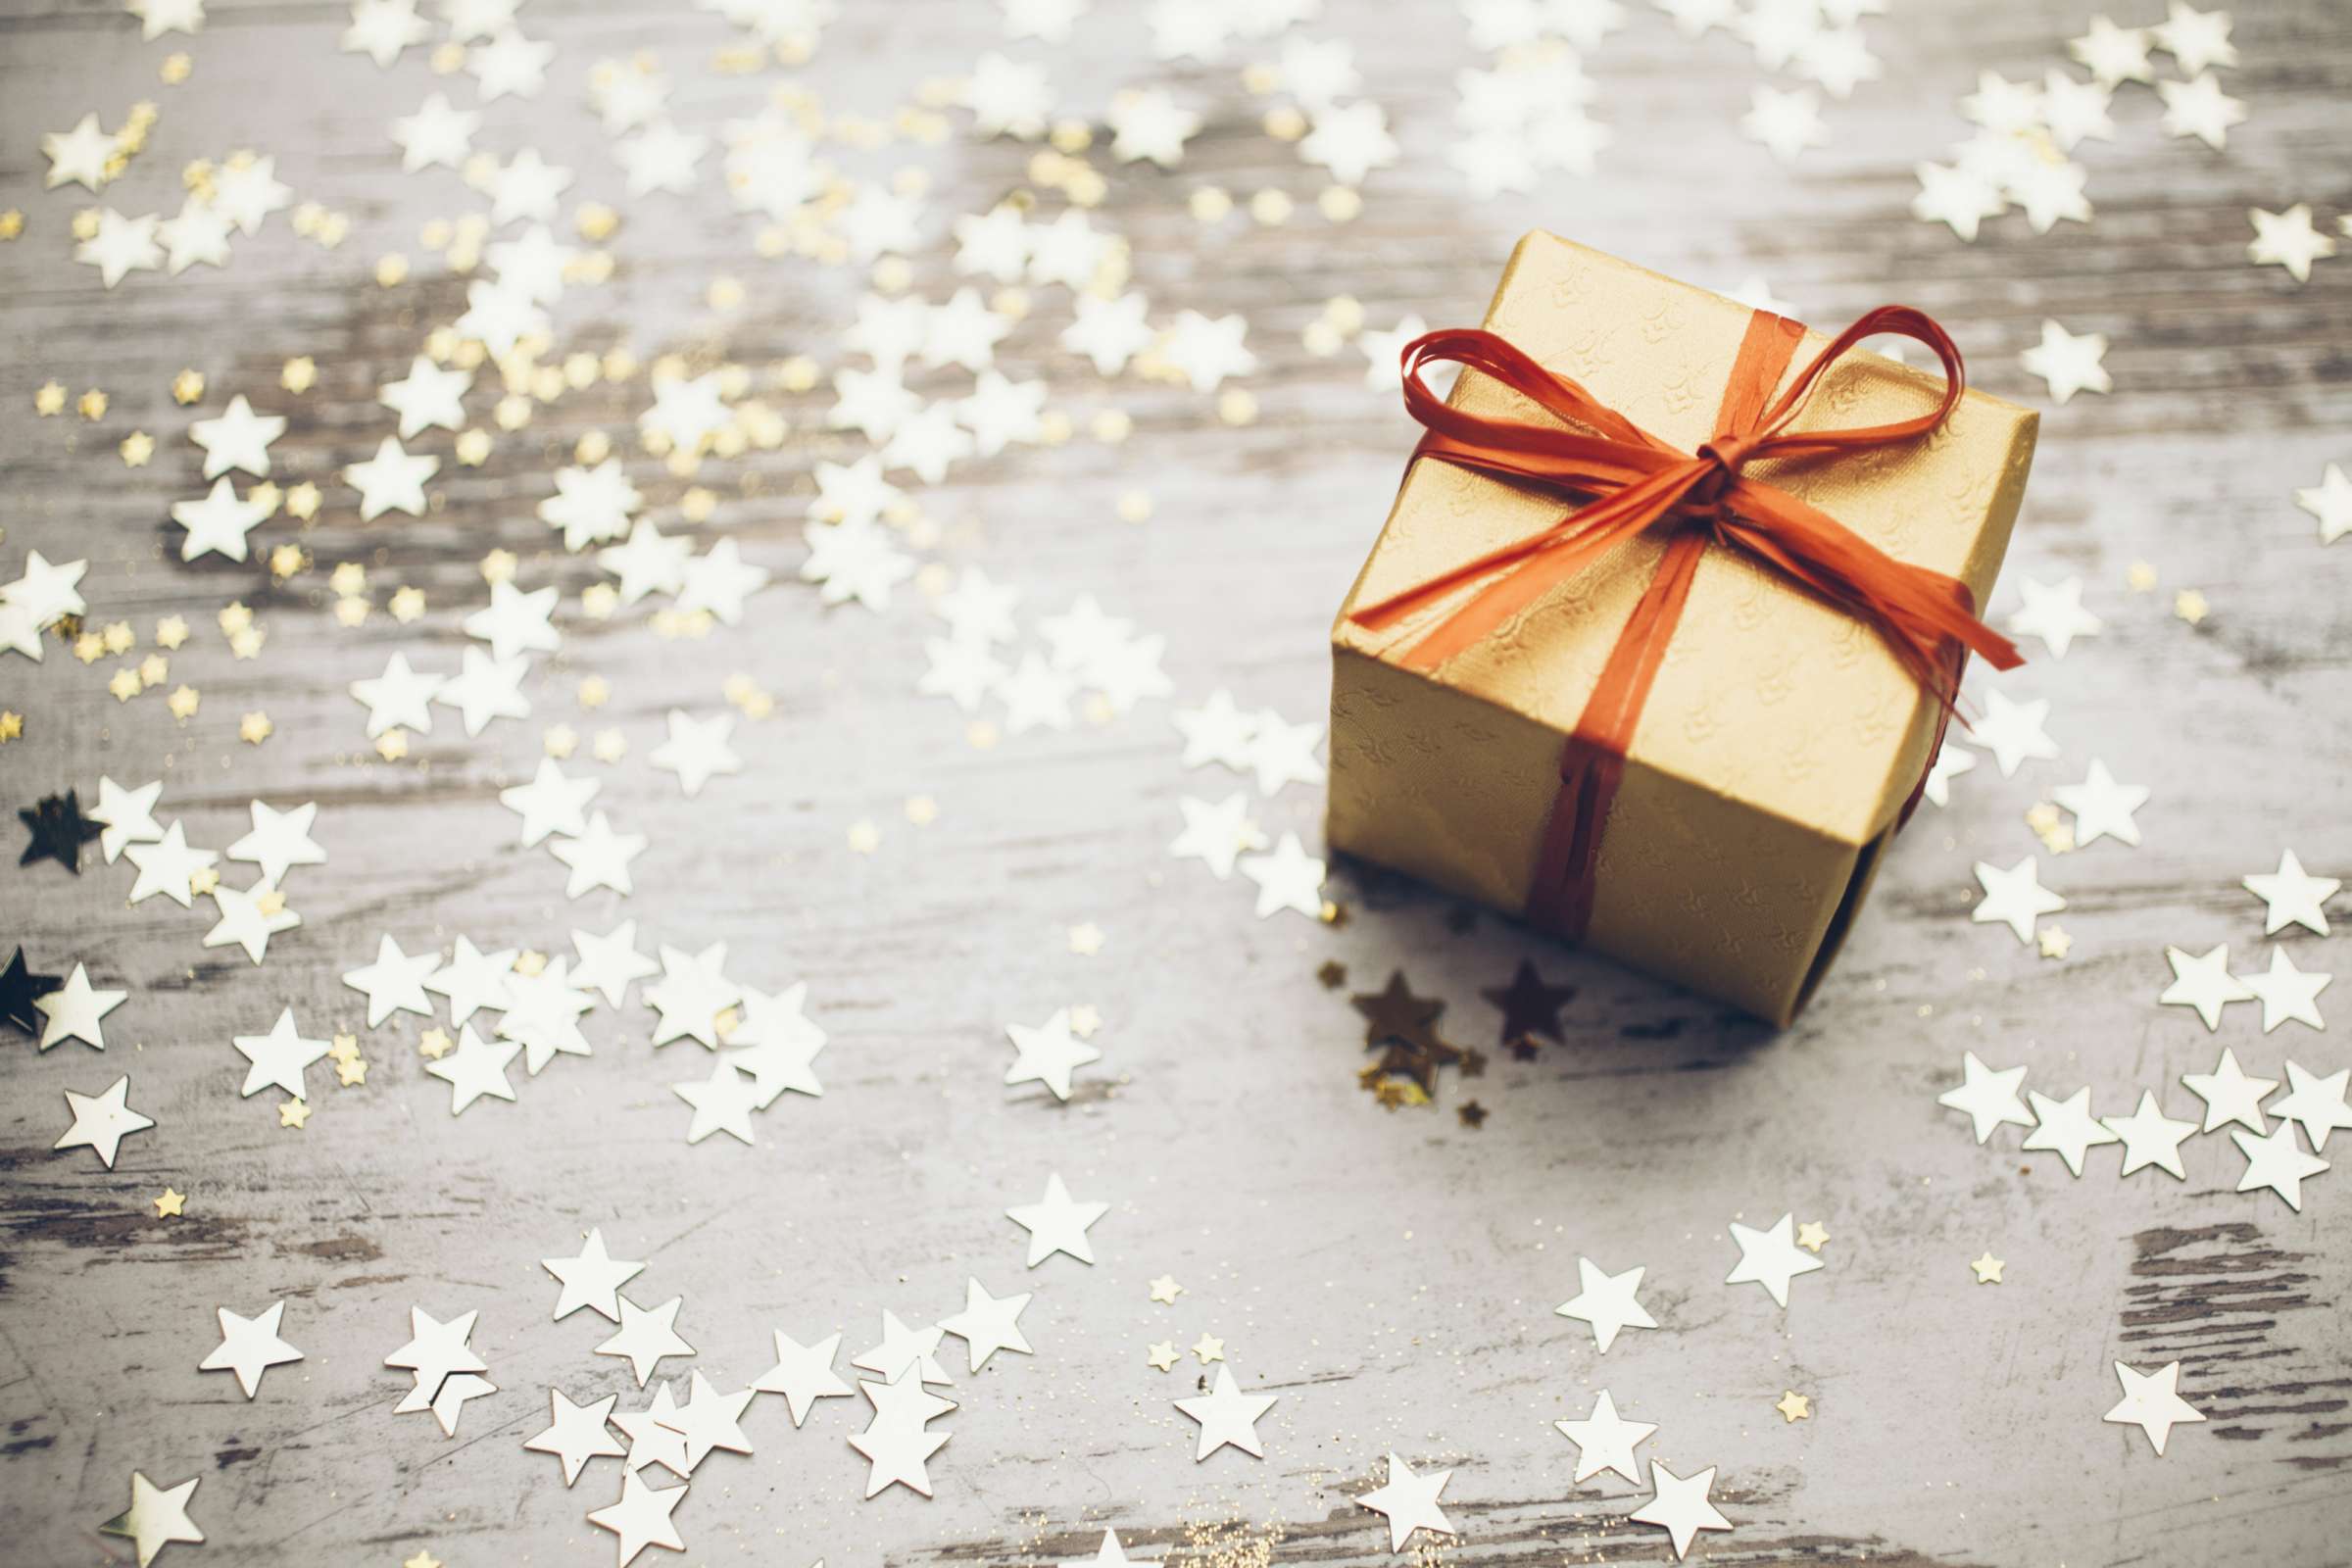 Background image: Wrapped Present_Bow and Stars